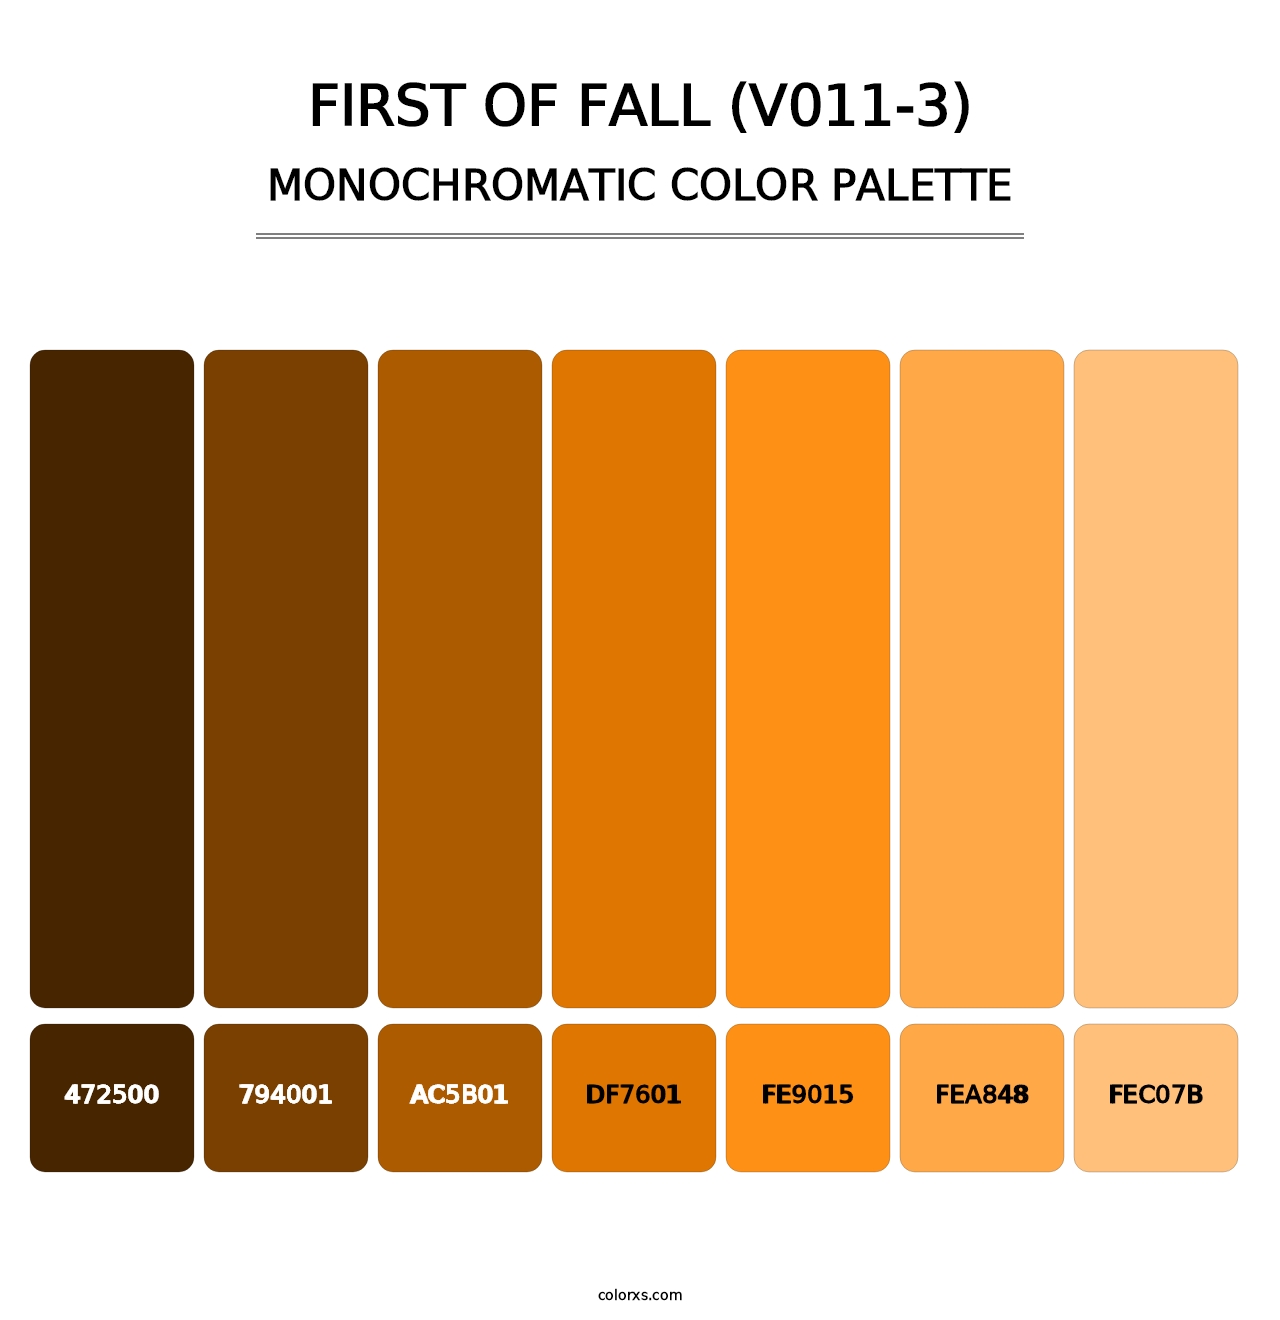 First of Fall (V011-3) - Monochromatic Color Palette